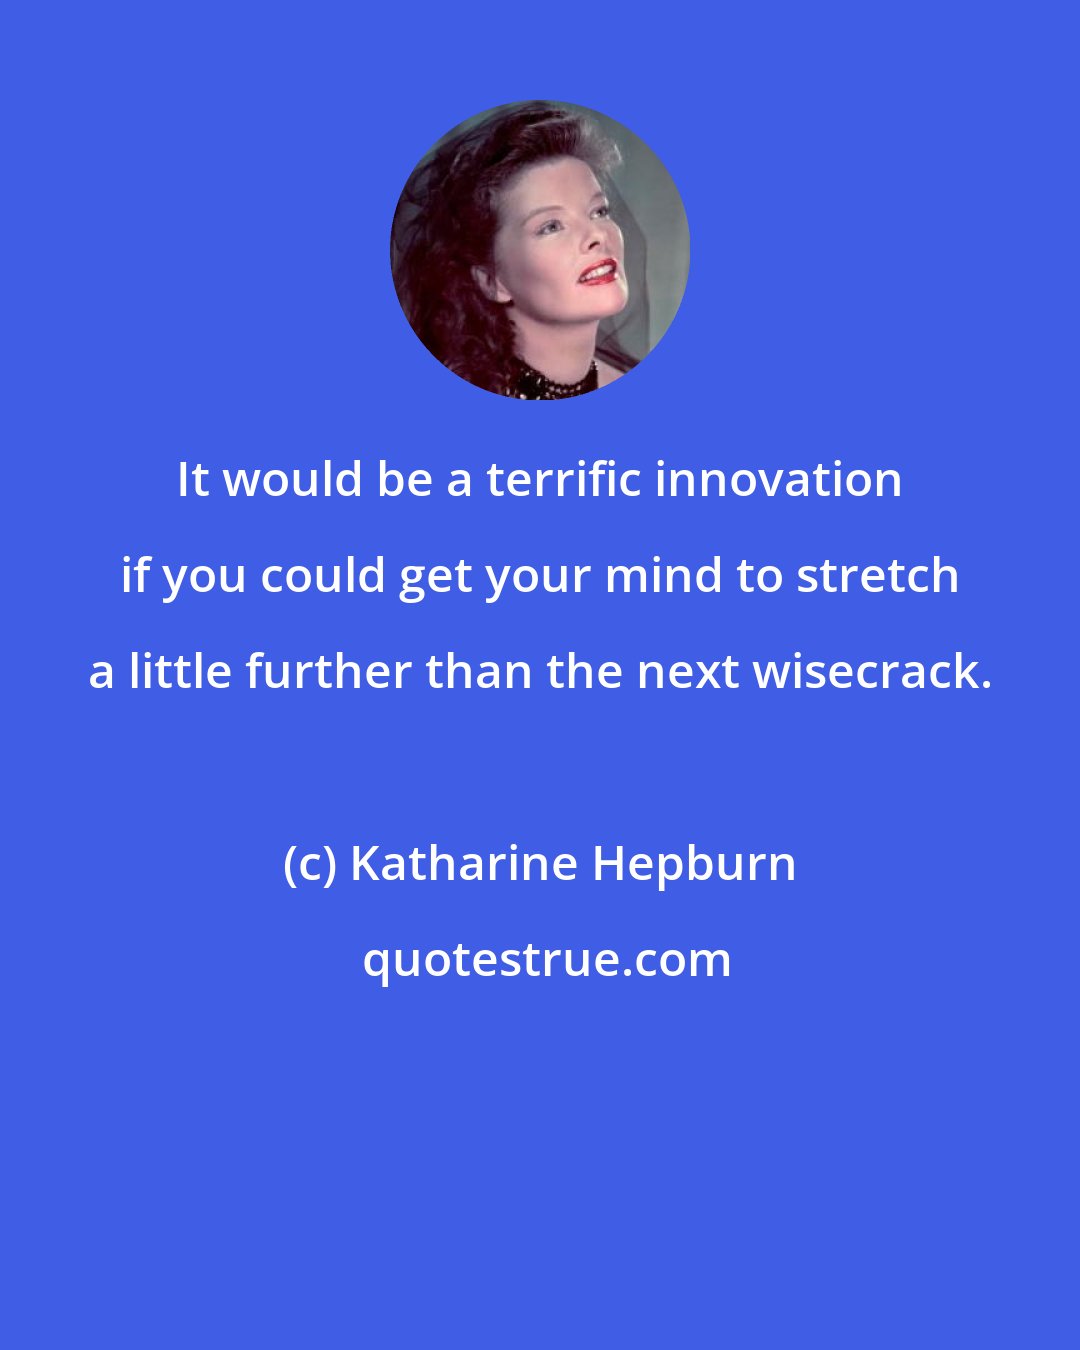 Katharine Hepburn: It would be a terrific innovation if you could get your mind to stretch a little further than the next wisecrack.